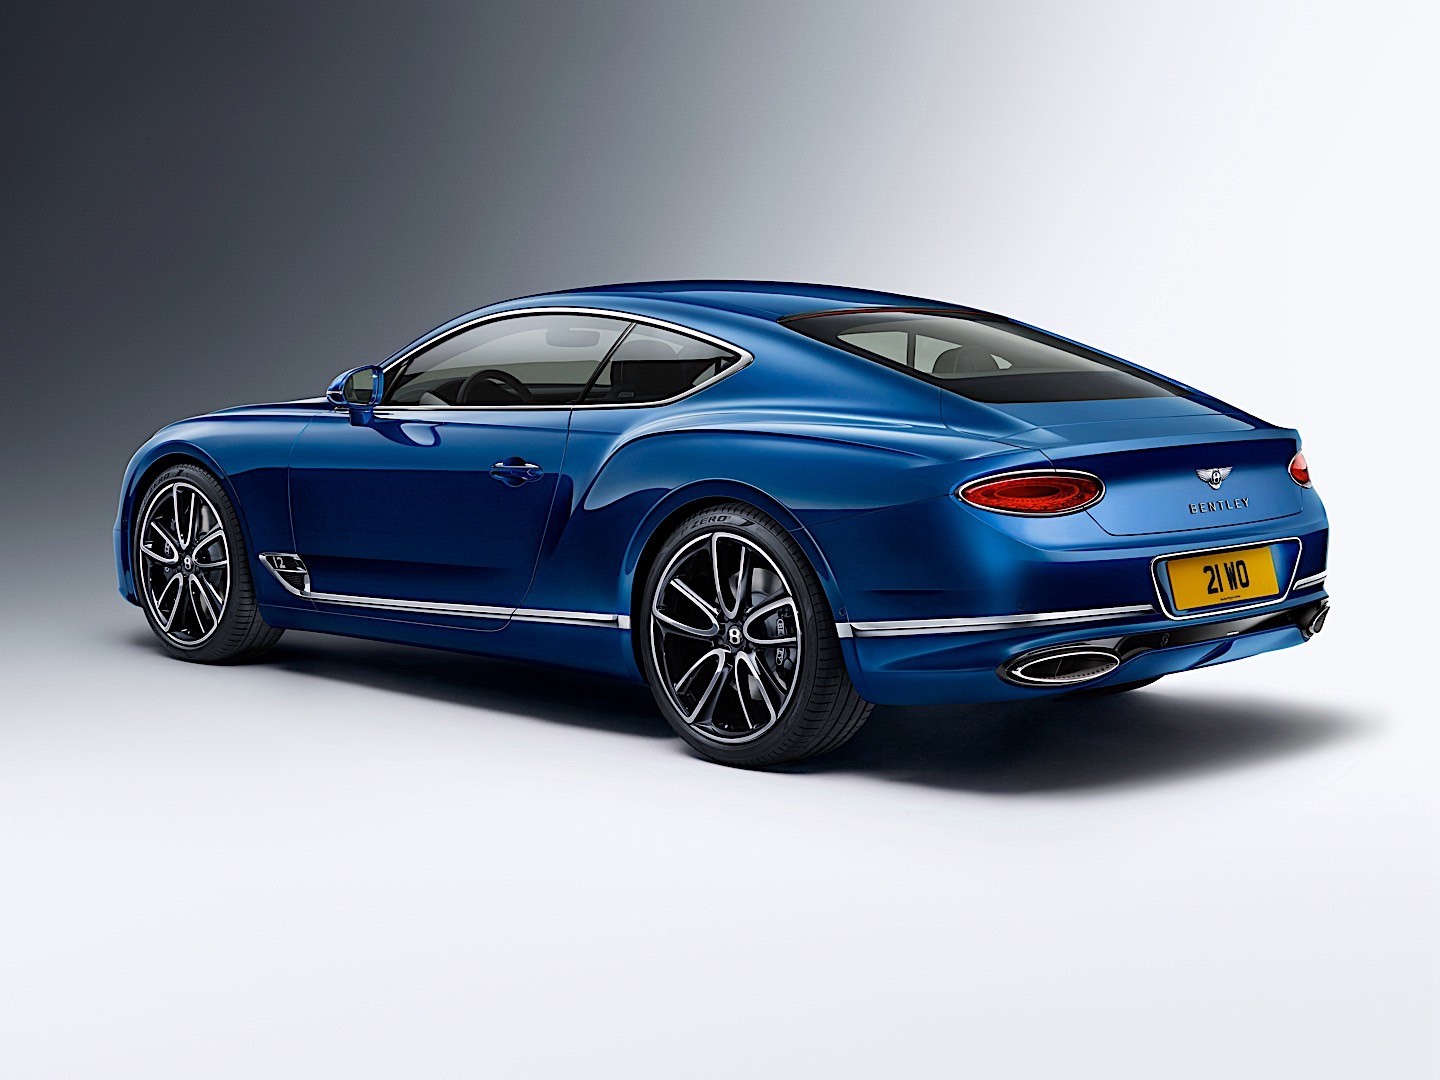 This Stanced Bentley Continental Isn't Your Average Rendering ...